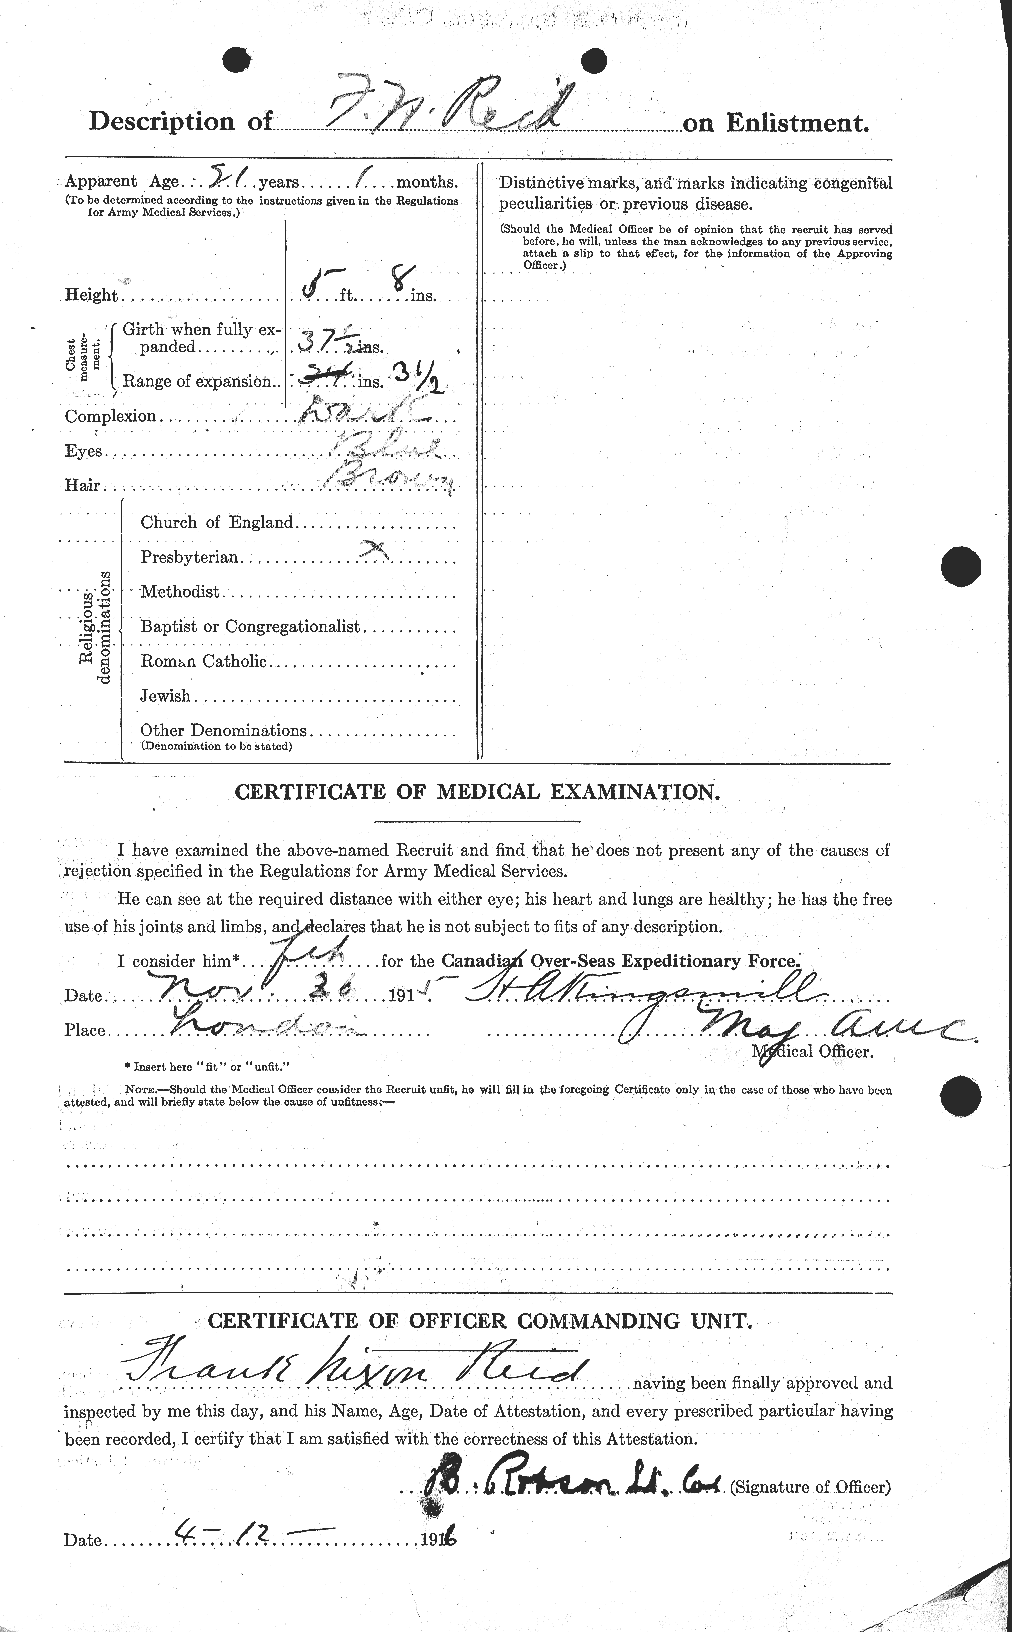 Personnel Records of the First World War - CEF 598050b